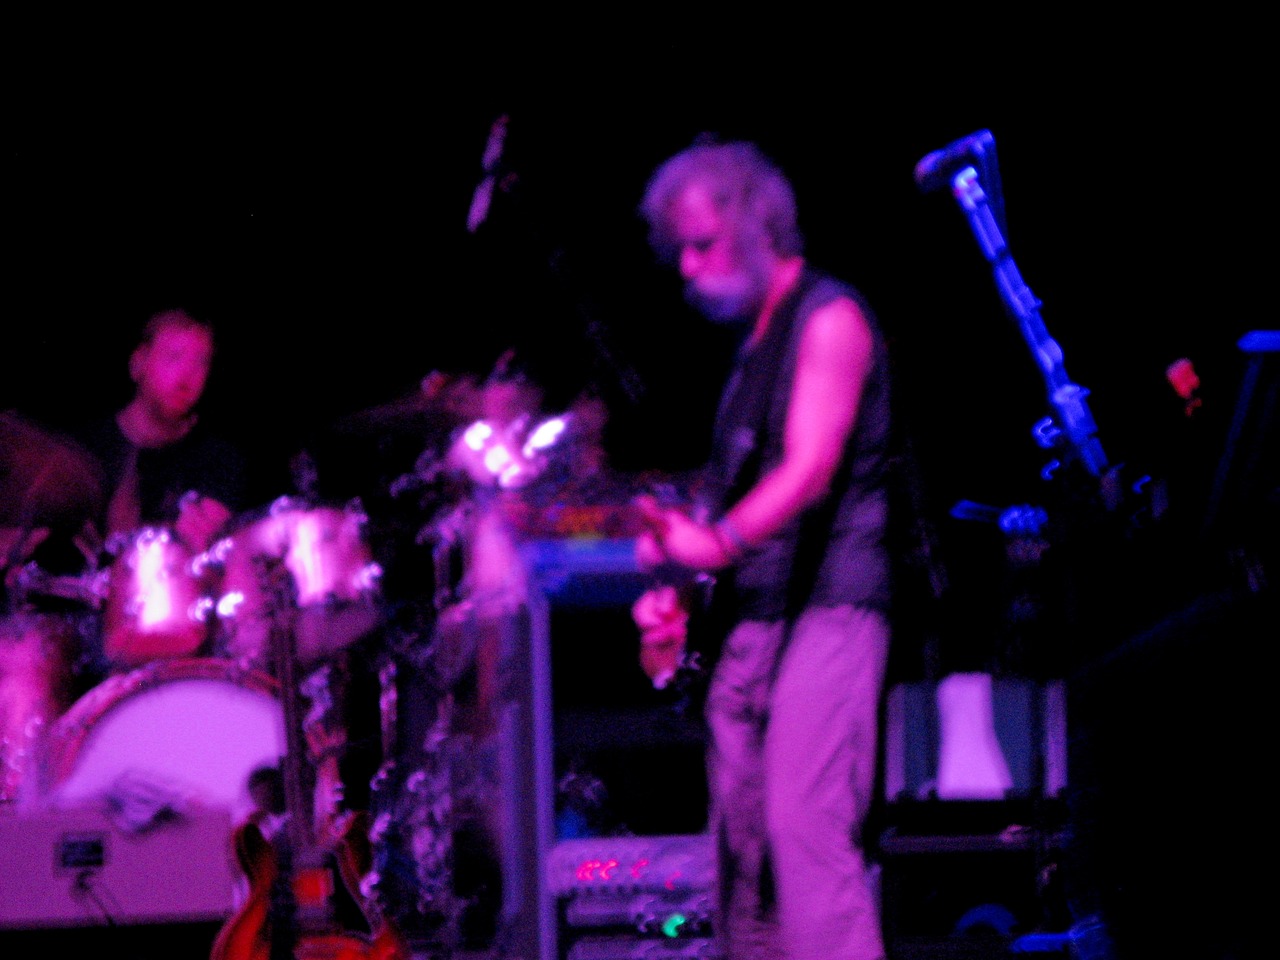 Bob Weir and Furthur performing at the St. Augustine Amphitheatre during the second set.